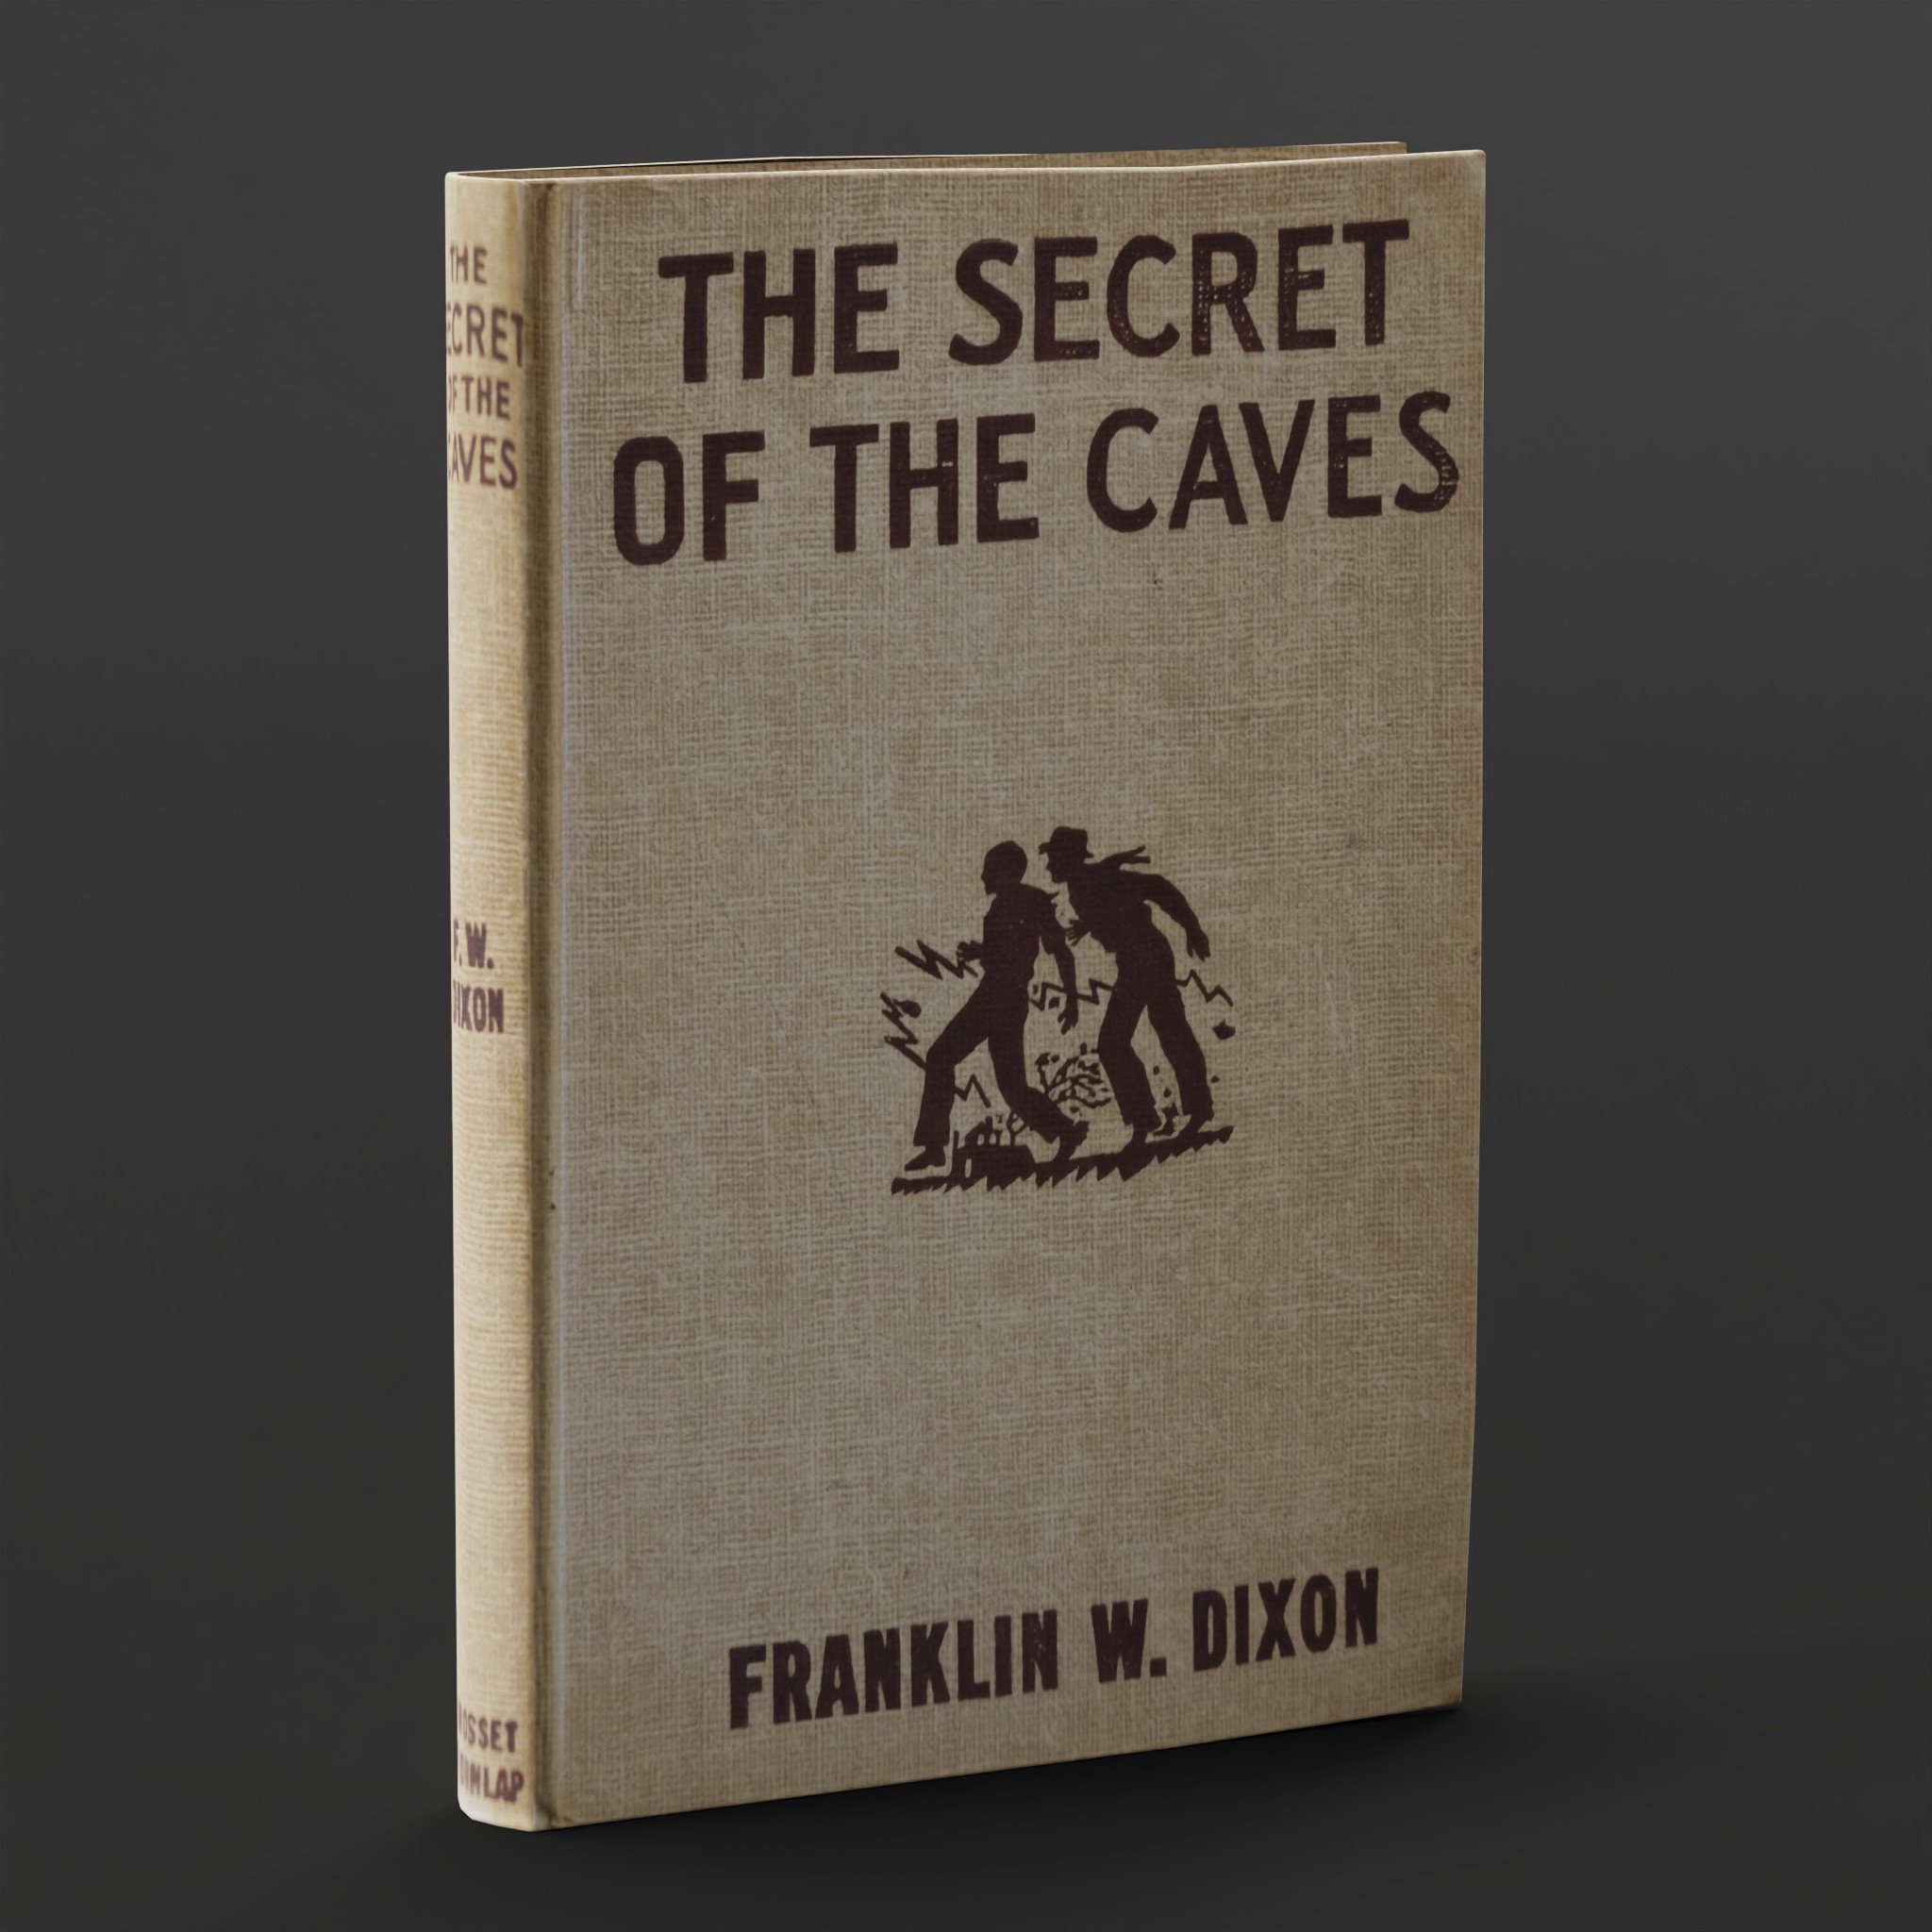 OLD BOOK: The Secret Of The Lost Caves | FREE 3D Book models | BlenderKit